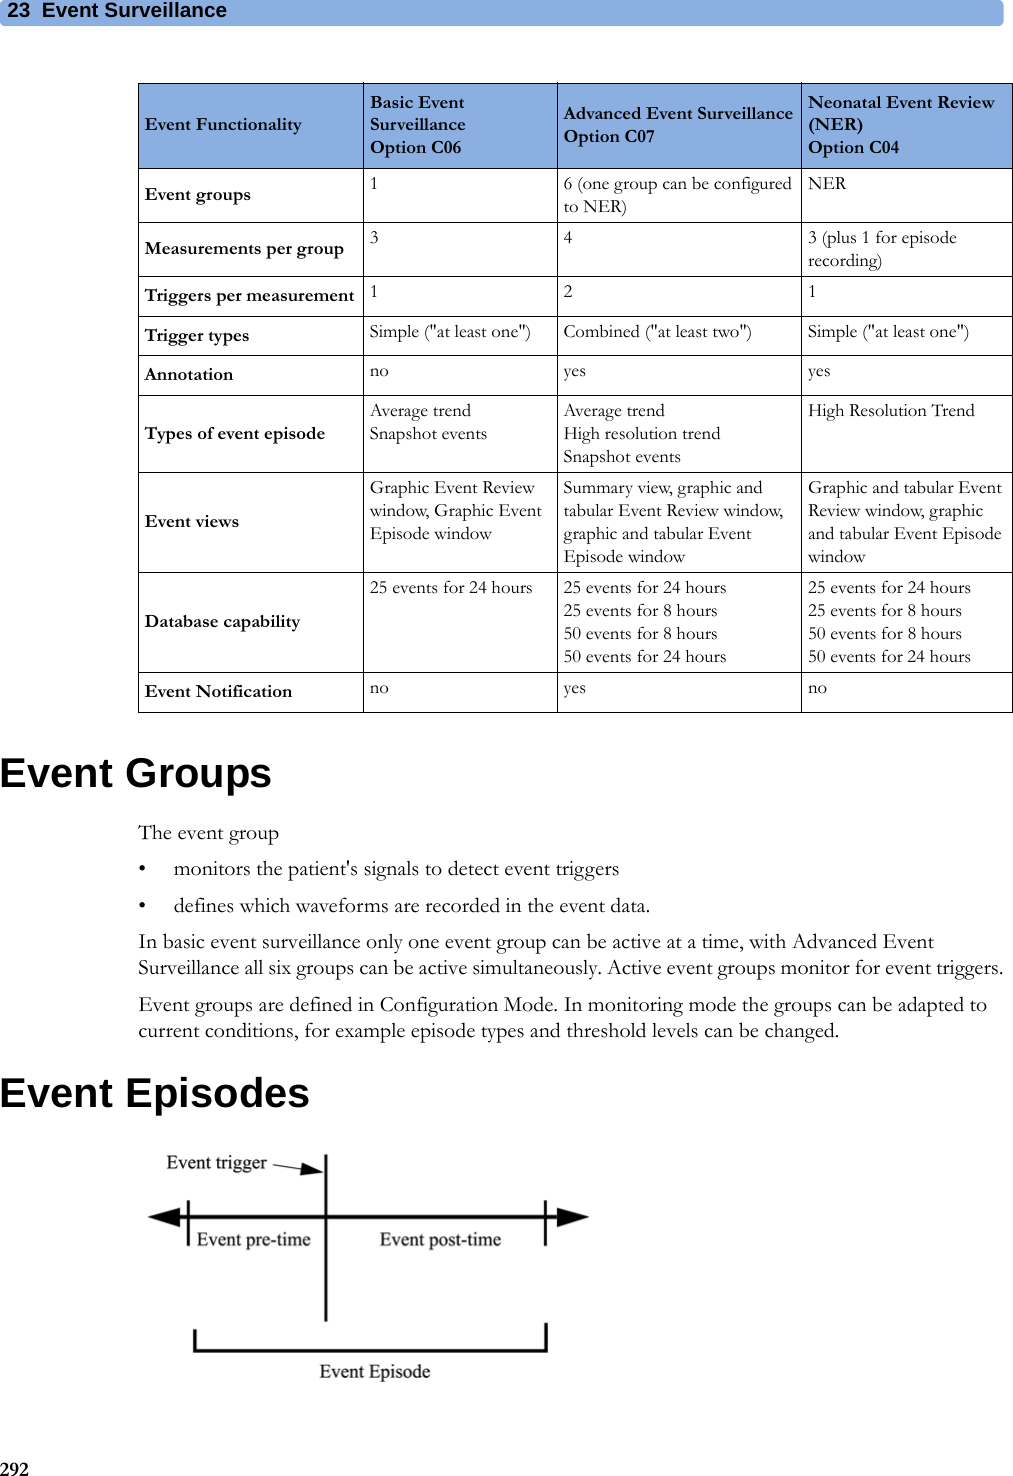 23 Event Surveillance292Event GroupsThe event group• monitors the patient&apos;s signals to detect event triggers• defines which waveforms are recorded in the event data.In basic event surveillance only one event group can be active at a time, with Advanced Event Surveillance all six groups can be active simultaneously. Active event groups monitor for event triggers.Event groups are defined in Configuration Mode. In monitoring mode the groups can be adapted to current conditions, for example episode types and threshold levels can be changed.Event EpisodesEvent FunctionalityBasic Event Surveillance Option C06Advanced Event SurveillanceOption C07Neonatal Event Review (NER)Option C04Event groups 1 6 (one group can be configured to NER)NERMeasurements per group 3 4 3 (plus 1 for episode recording)Triggers per measurement 12 1Trigger types Simple (&quot;at least one&quot;) Combined (&quot;at least two&quot;) Simple (&quot;at least one&quot;)Annotation no yes yesTypes of event episodeAverage trendSnapshot eventsAverage trendHigh resolution trendSnapshot eventsHigh Resolution TrendEvent viewsGraphic Event Review window, Graphic Event Episode windowSummary view, graphic and tabular Event Review window, graphic and tabular Event Episode windowGraphic and tabular Event Review window, graphic and tabular Event Episode windowDatabase capability25 events for 24 hours 25 events for 24 hours25 events for 8 hours50 events for 8 hours 50 events for 24 hours25 events for 24 hours25 events for 8 hours50 events for 8 hours 50 events for 24 hoursEvent Notification no yes no